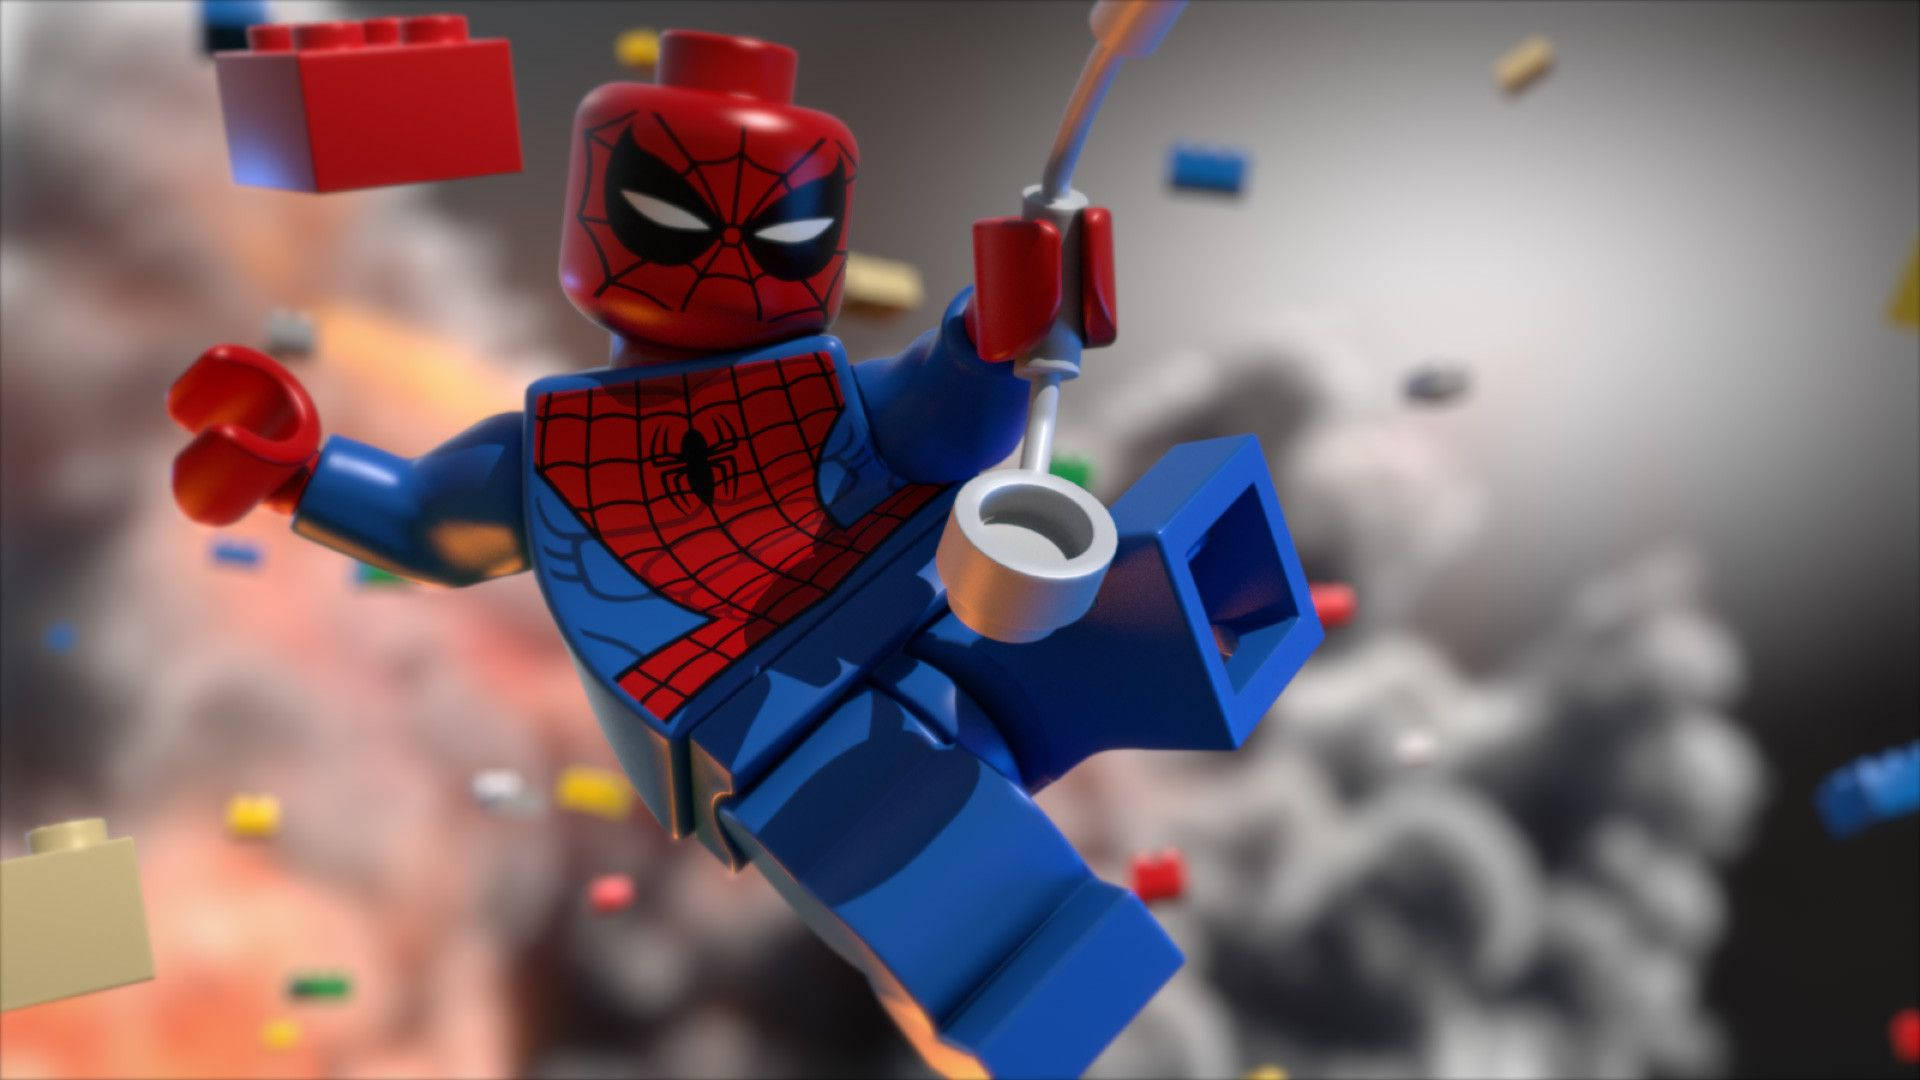 Legotoy Spiderman Iron Spider Would Be Translated As 